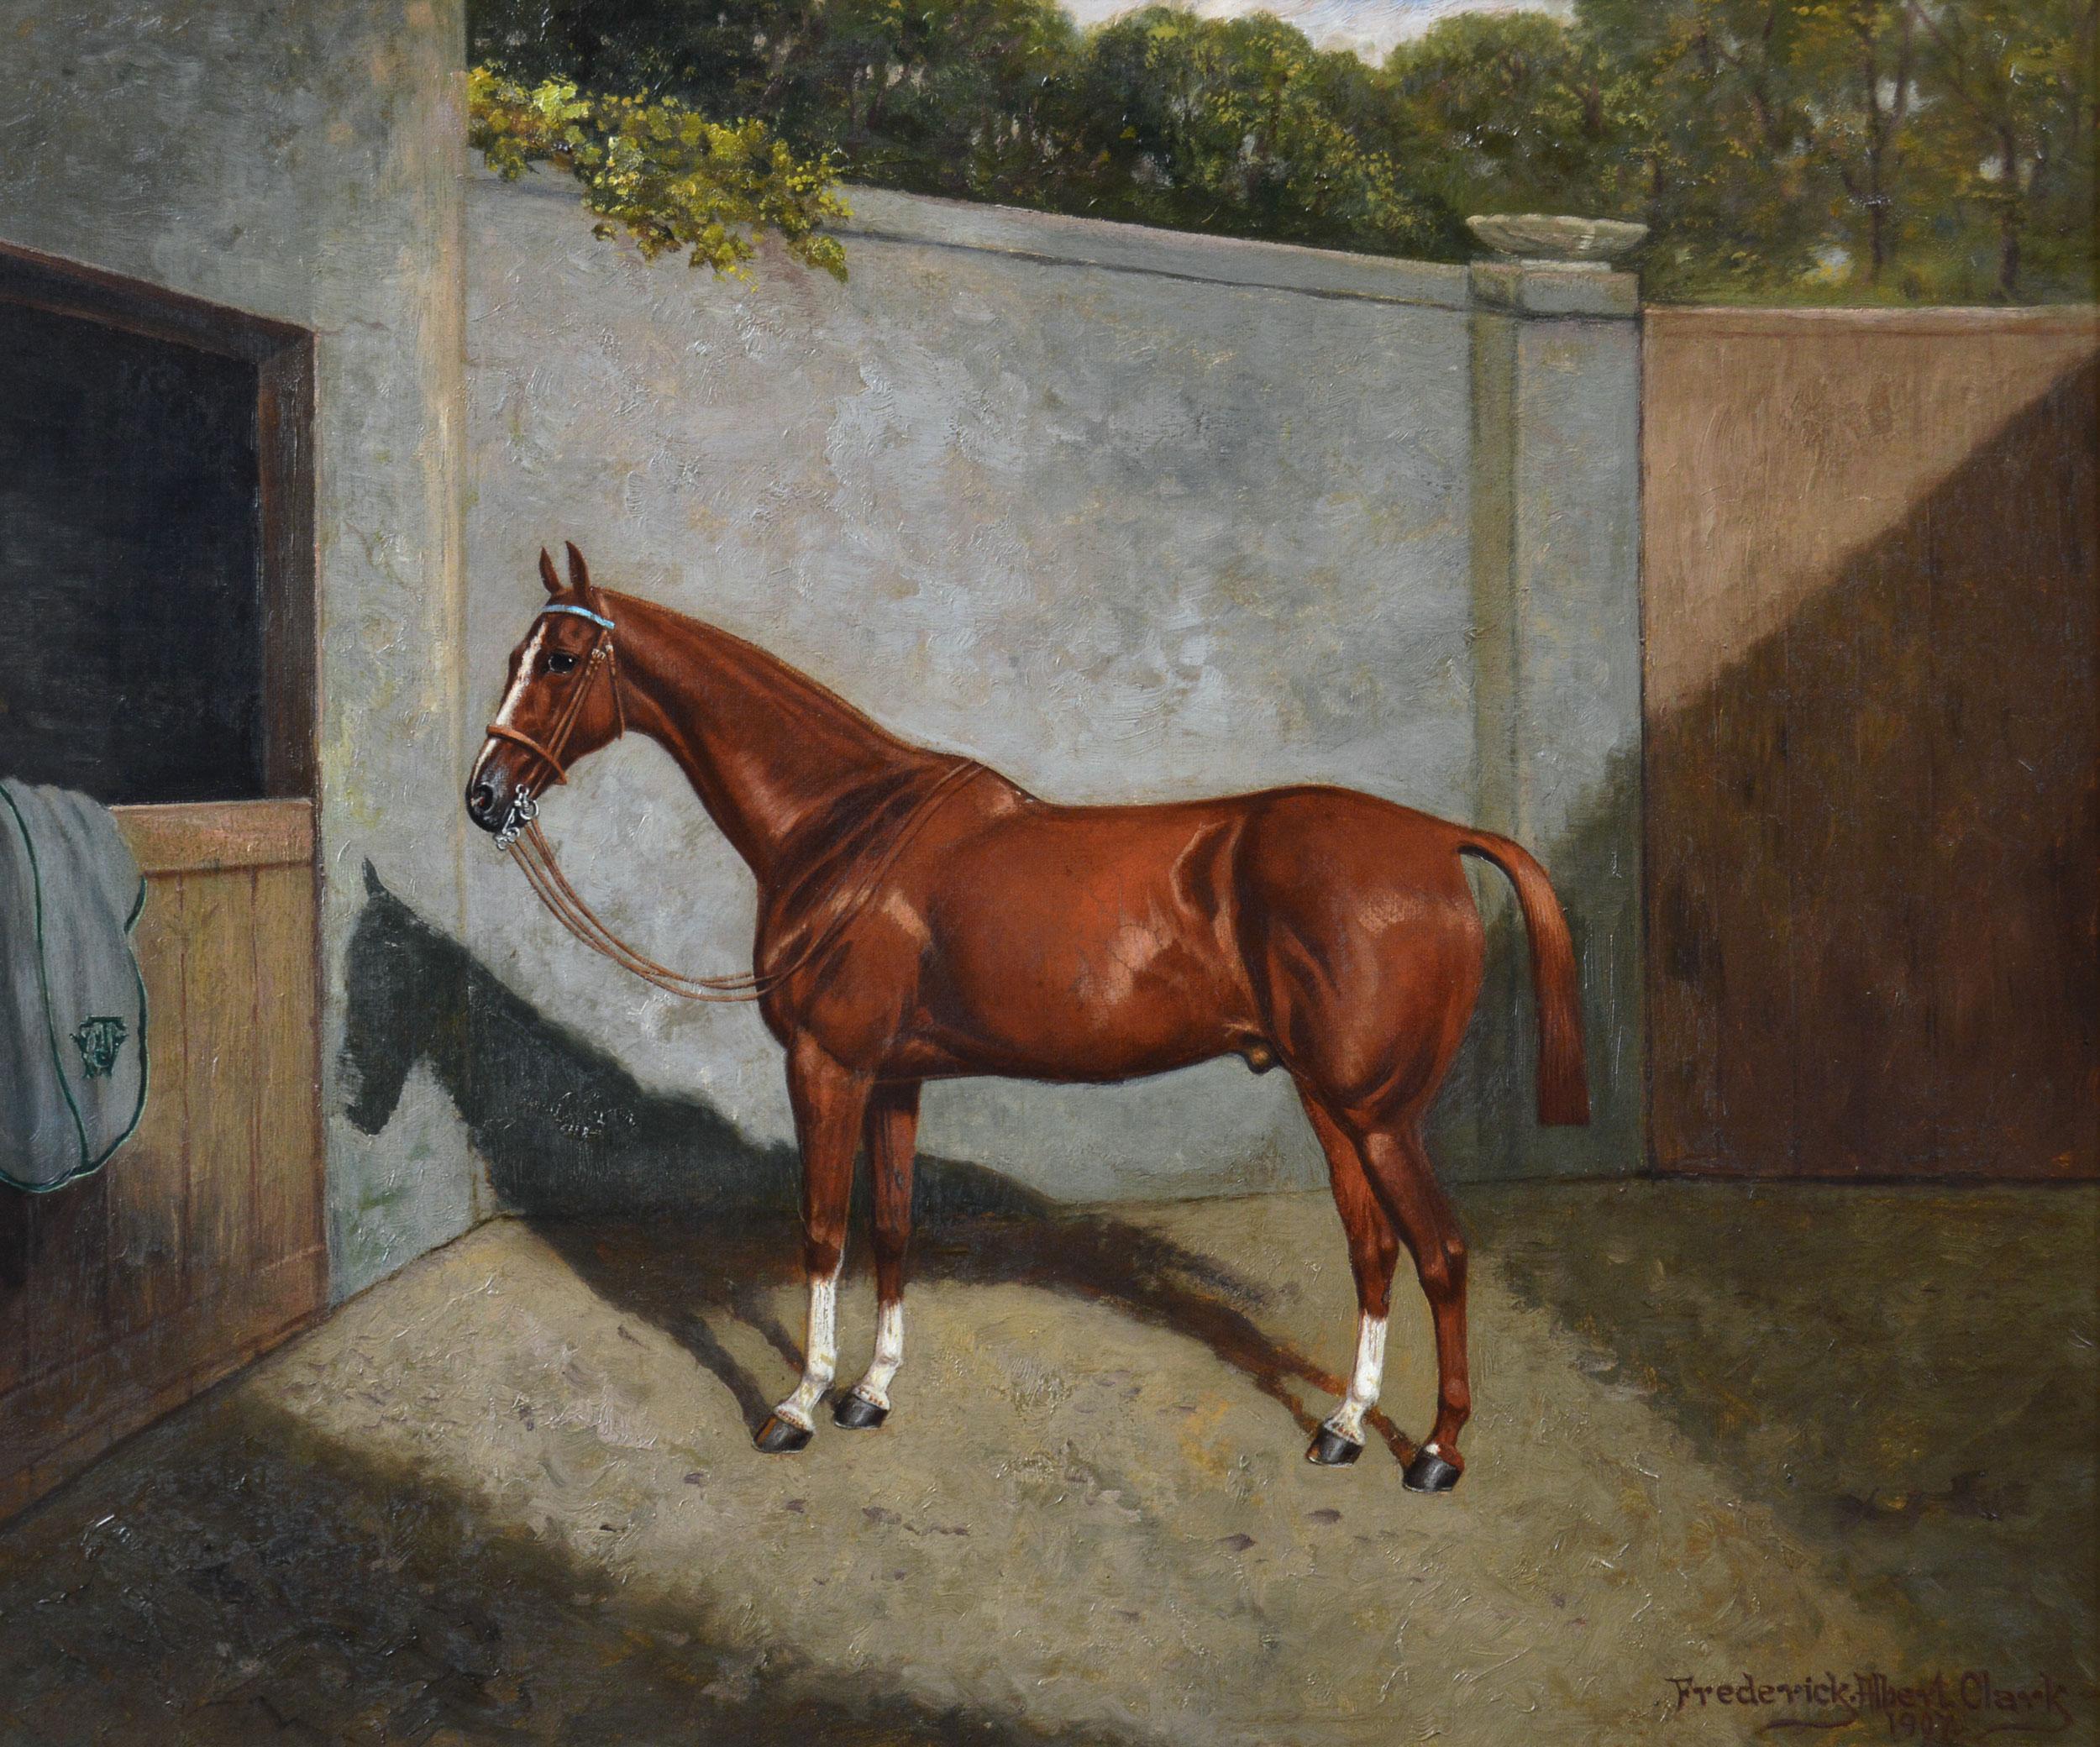 Sporting horse portrait oil painting of a chestnut hackney gelding - Painting by Frederick Albert Clark